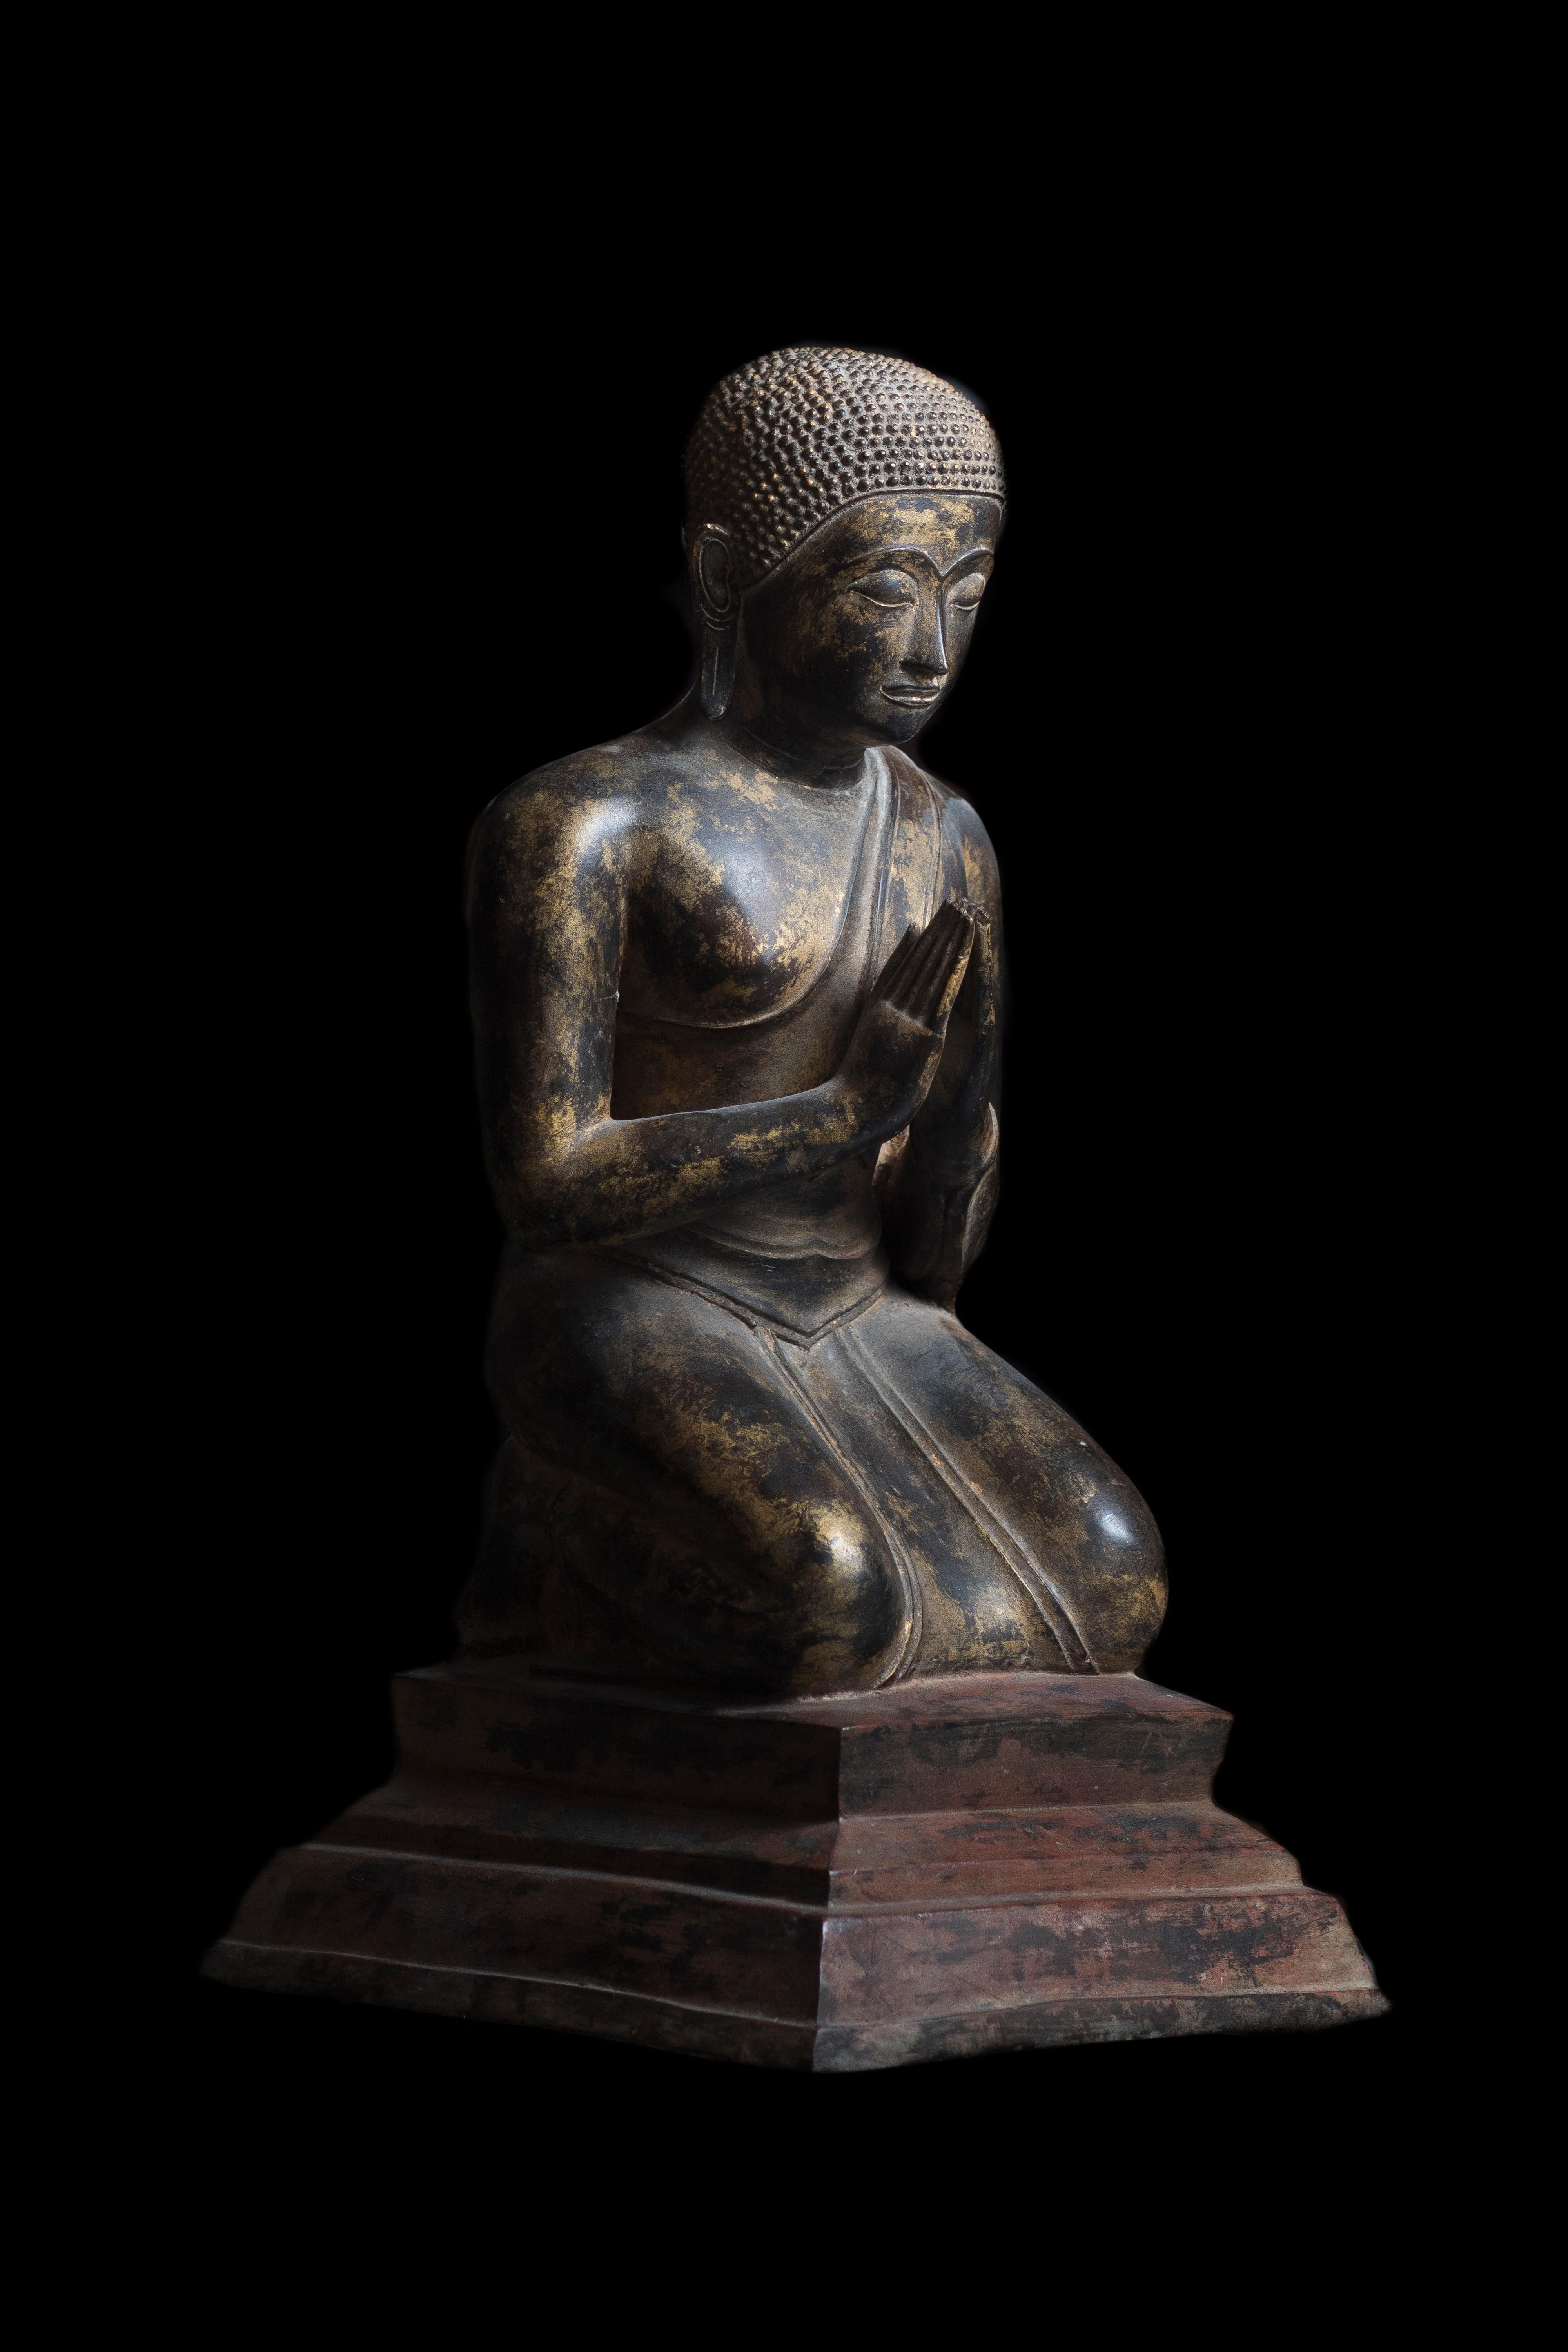 Kneeling Disciples of Buddha 18th/19th century - Gold Figurative Sculpture by Unknown